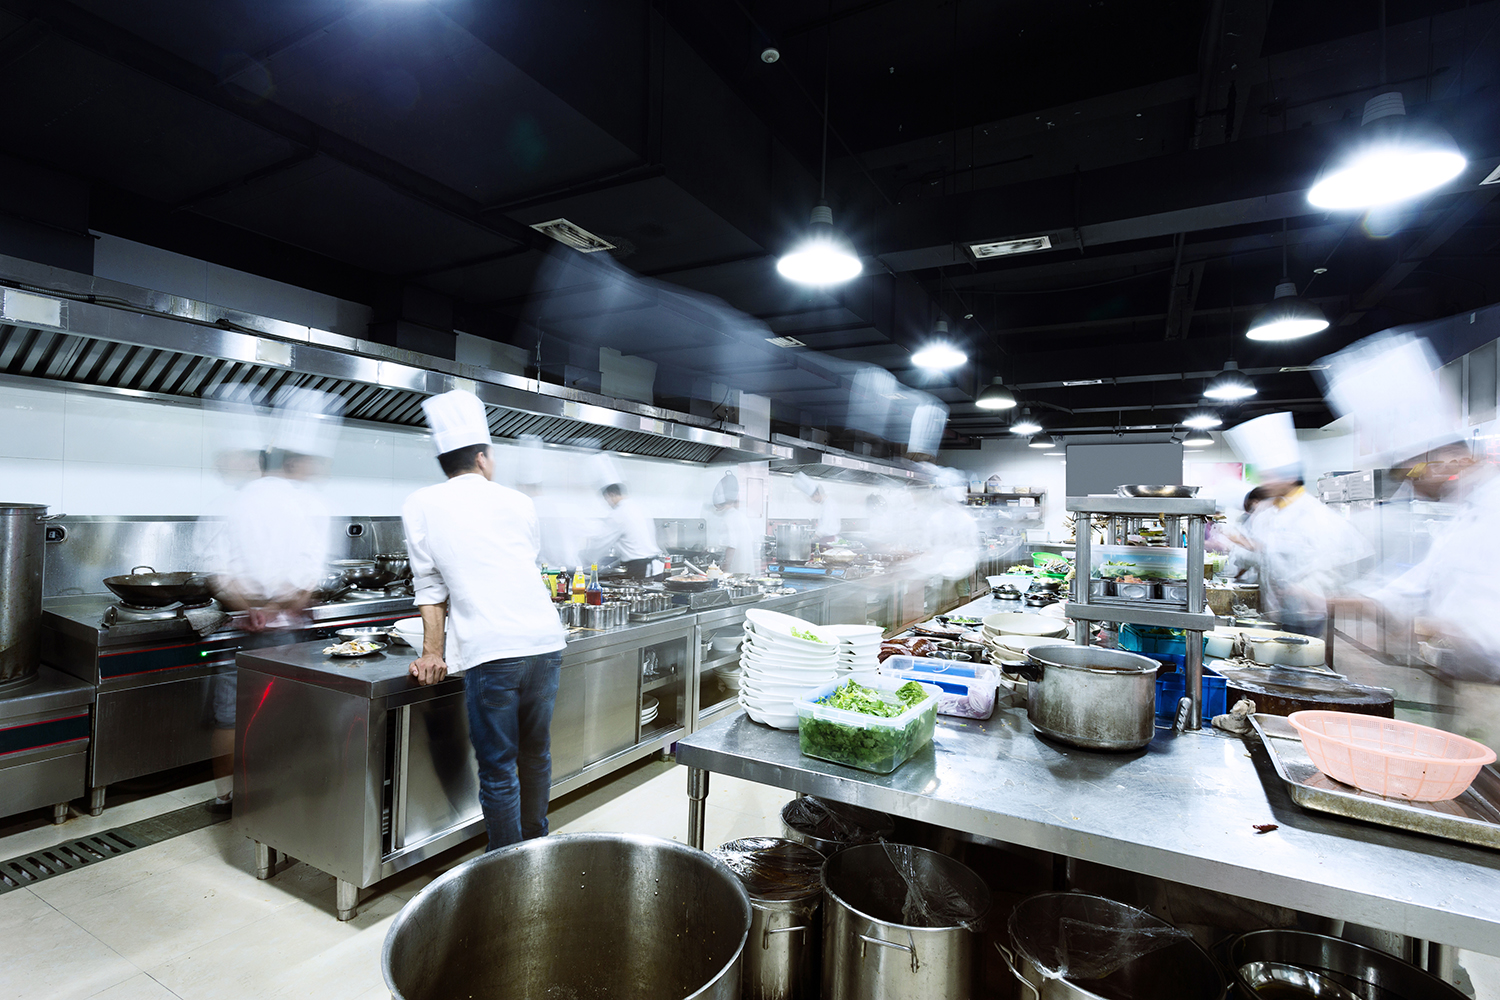 modern kitchen and busy chefs